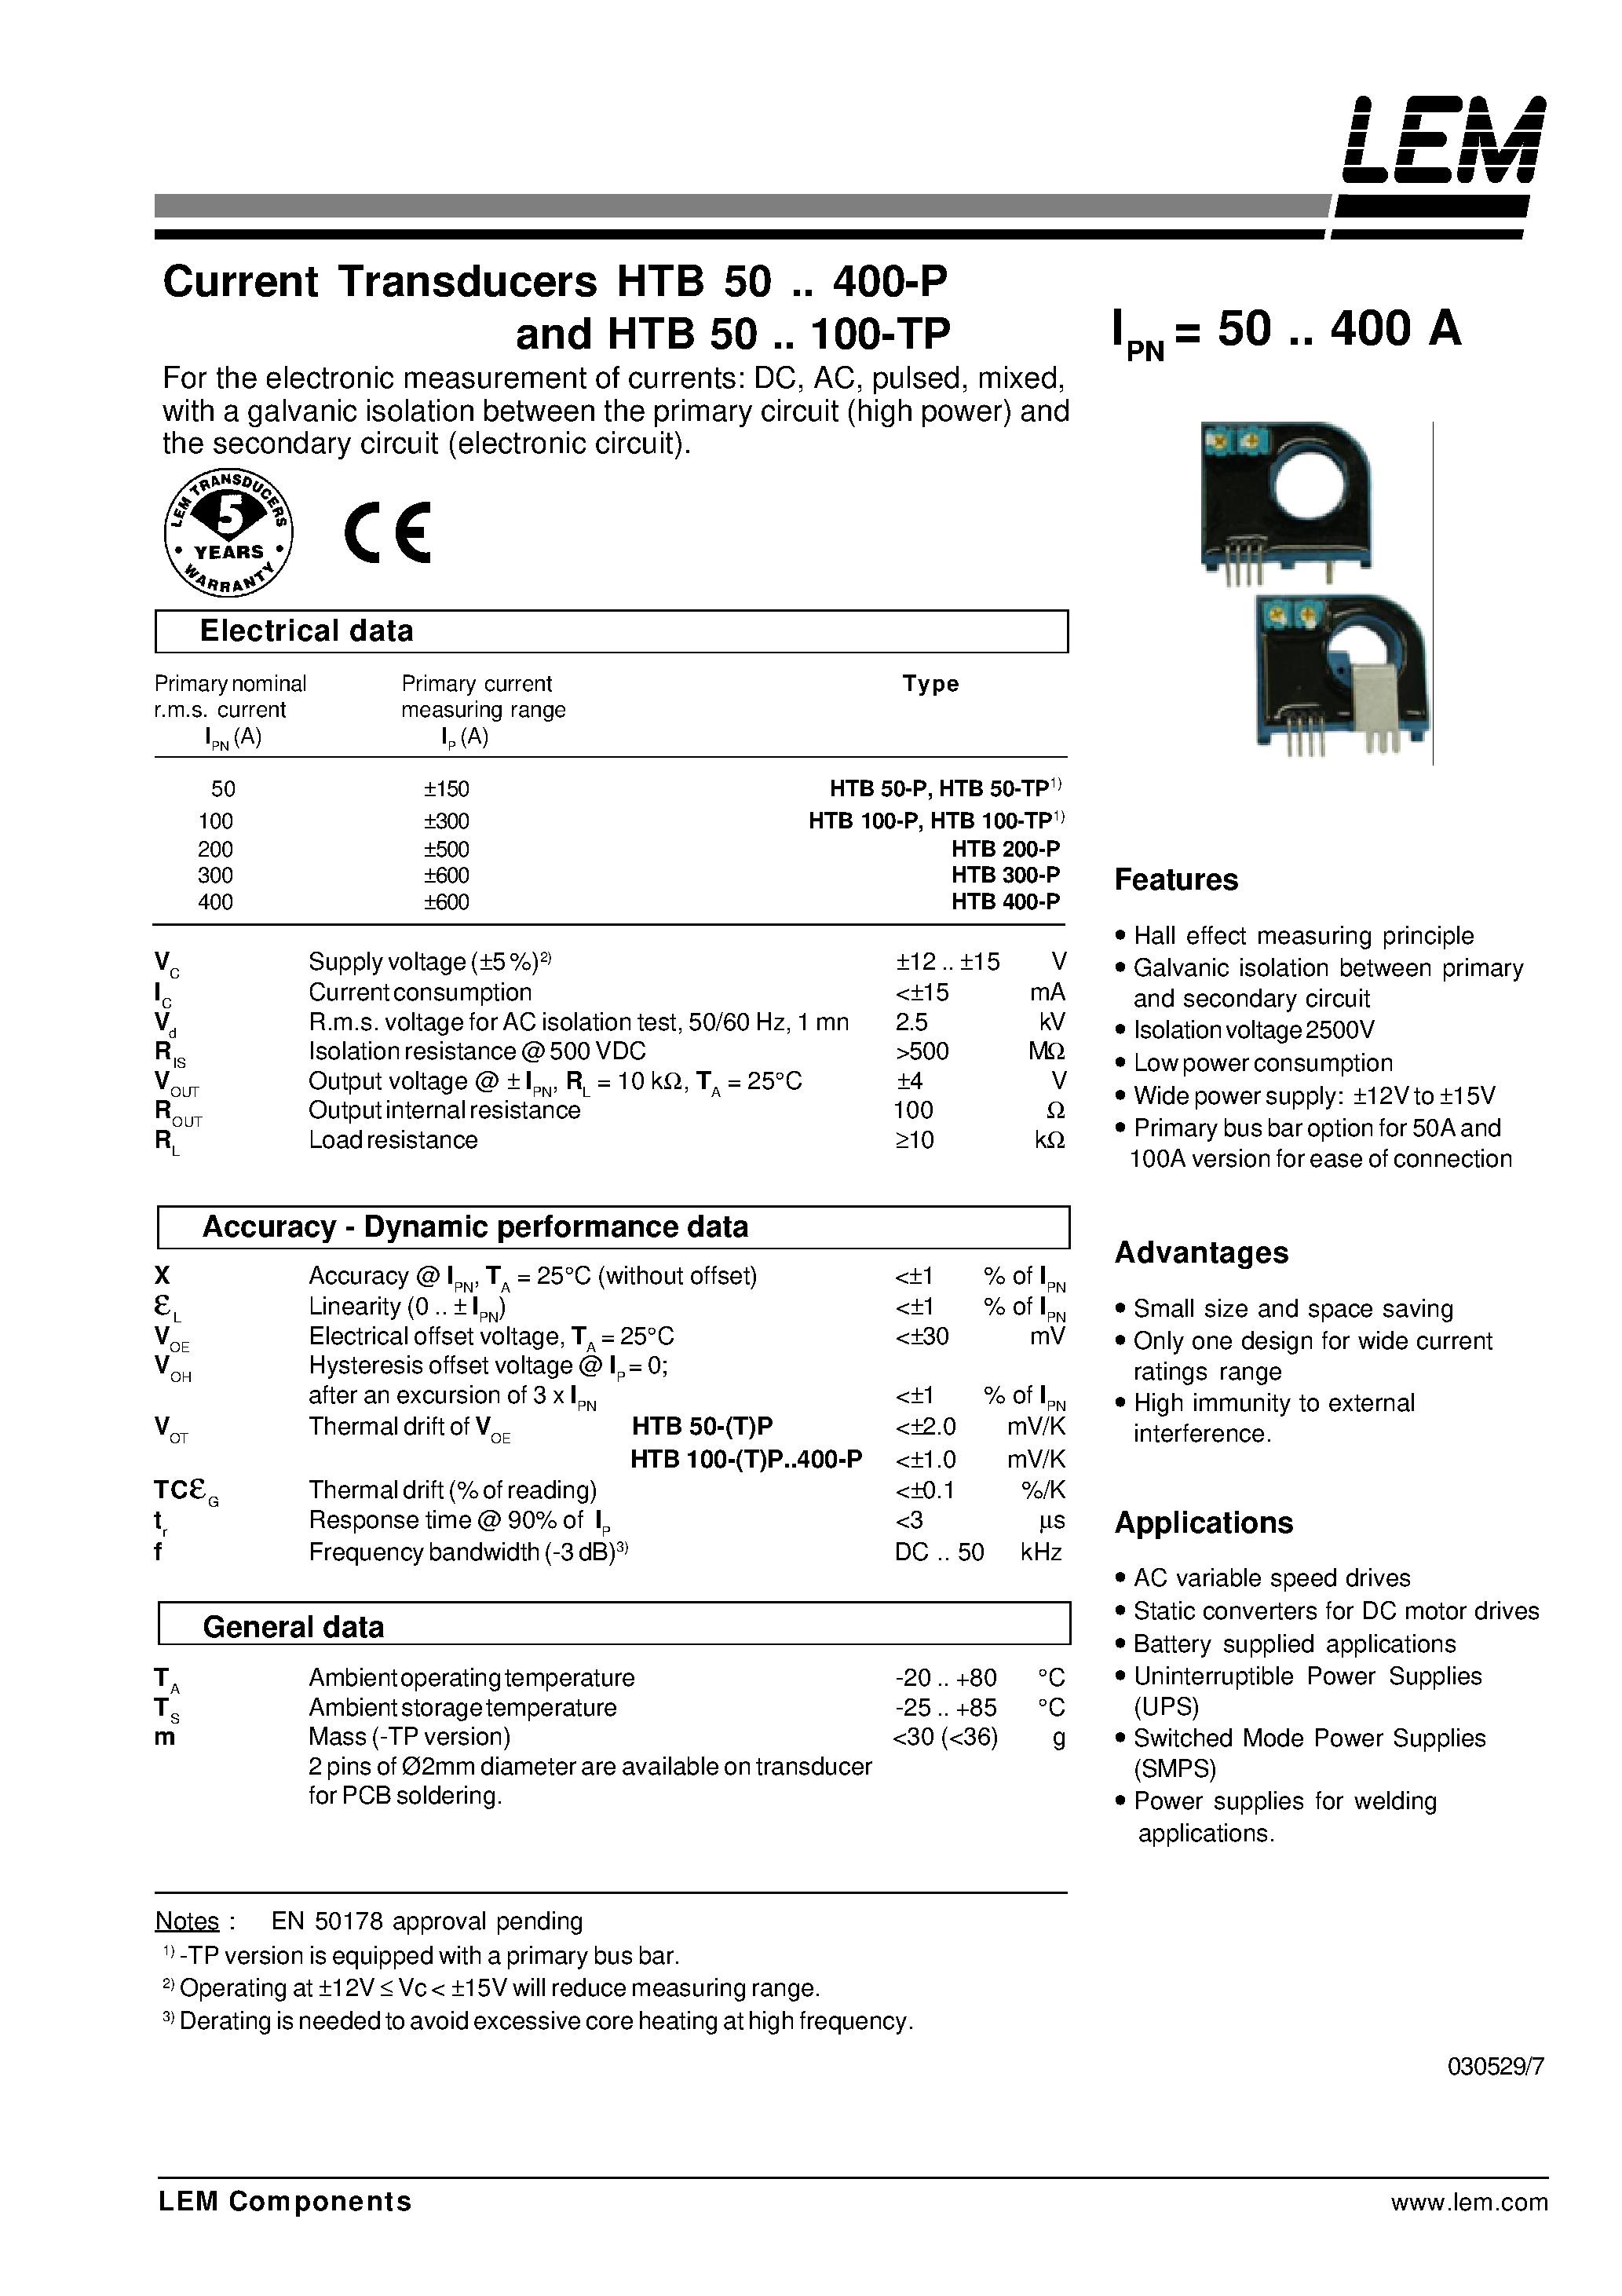 Datasheet HTB50-P - Current Transducers HTB 50~400-P and HTB 50~100-TP page 1